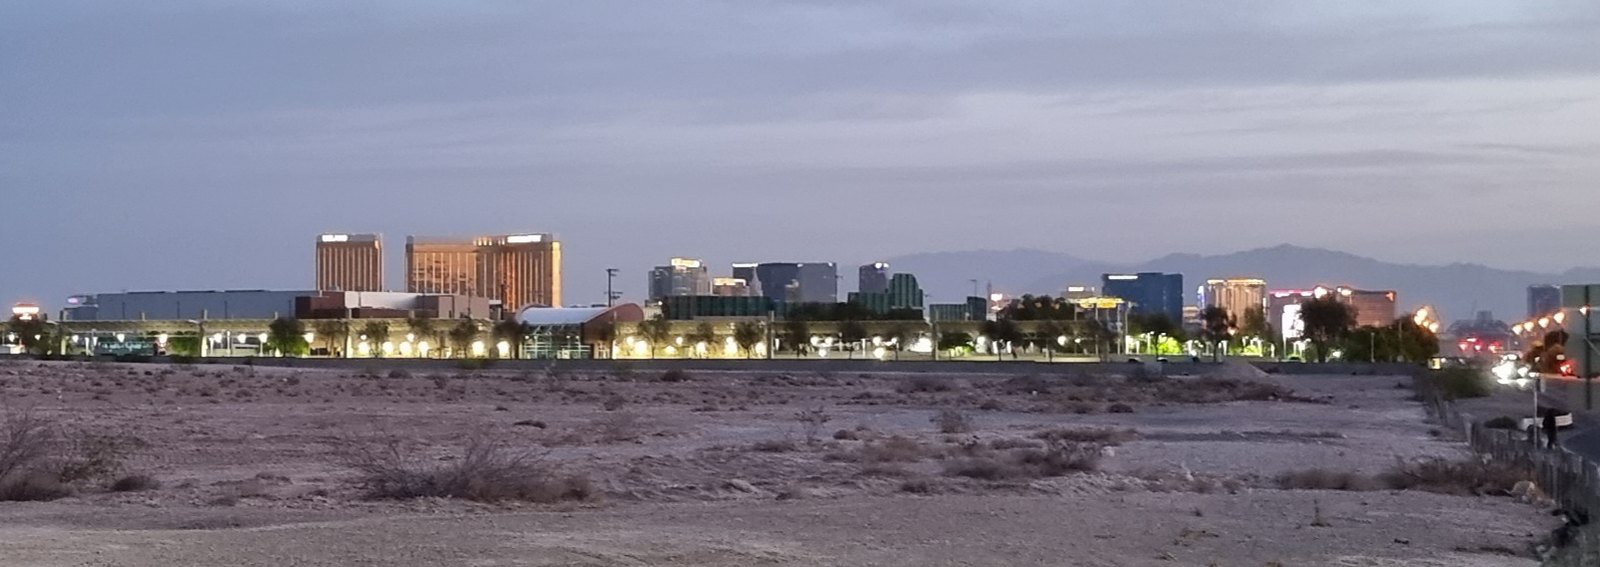 A view of Las Vegas early in the morning